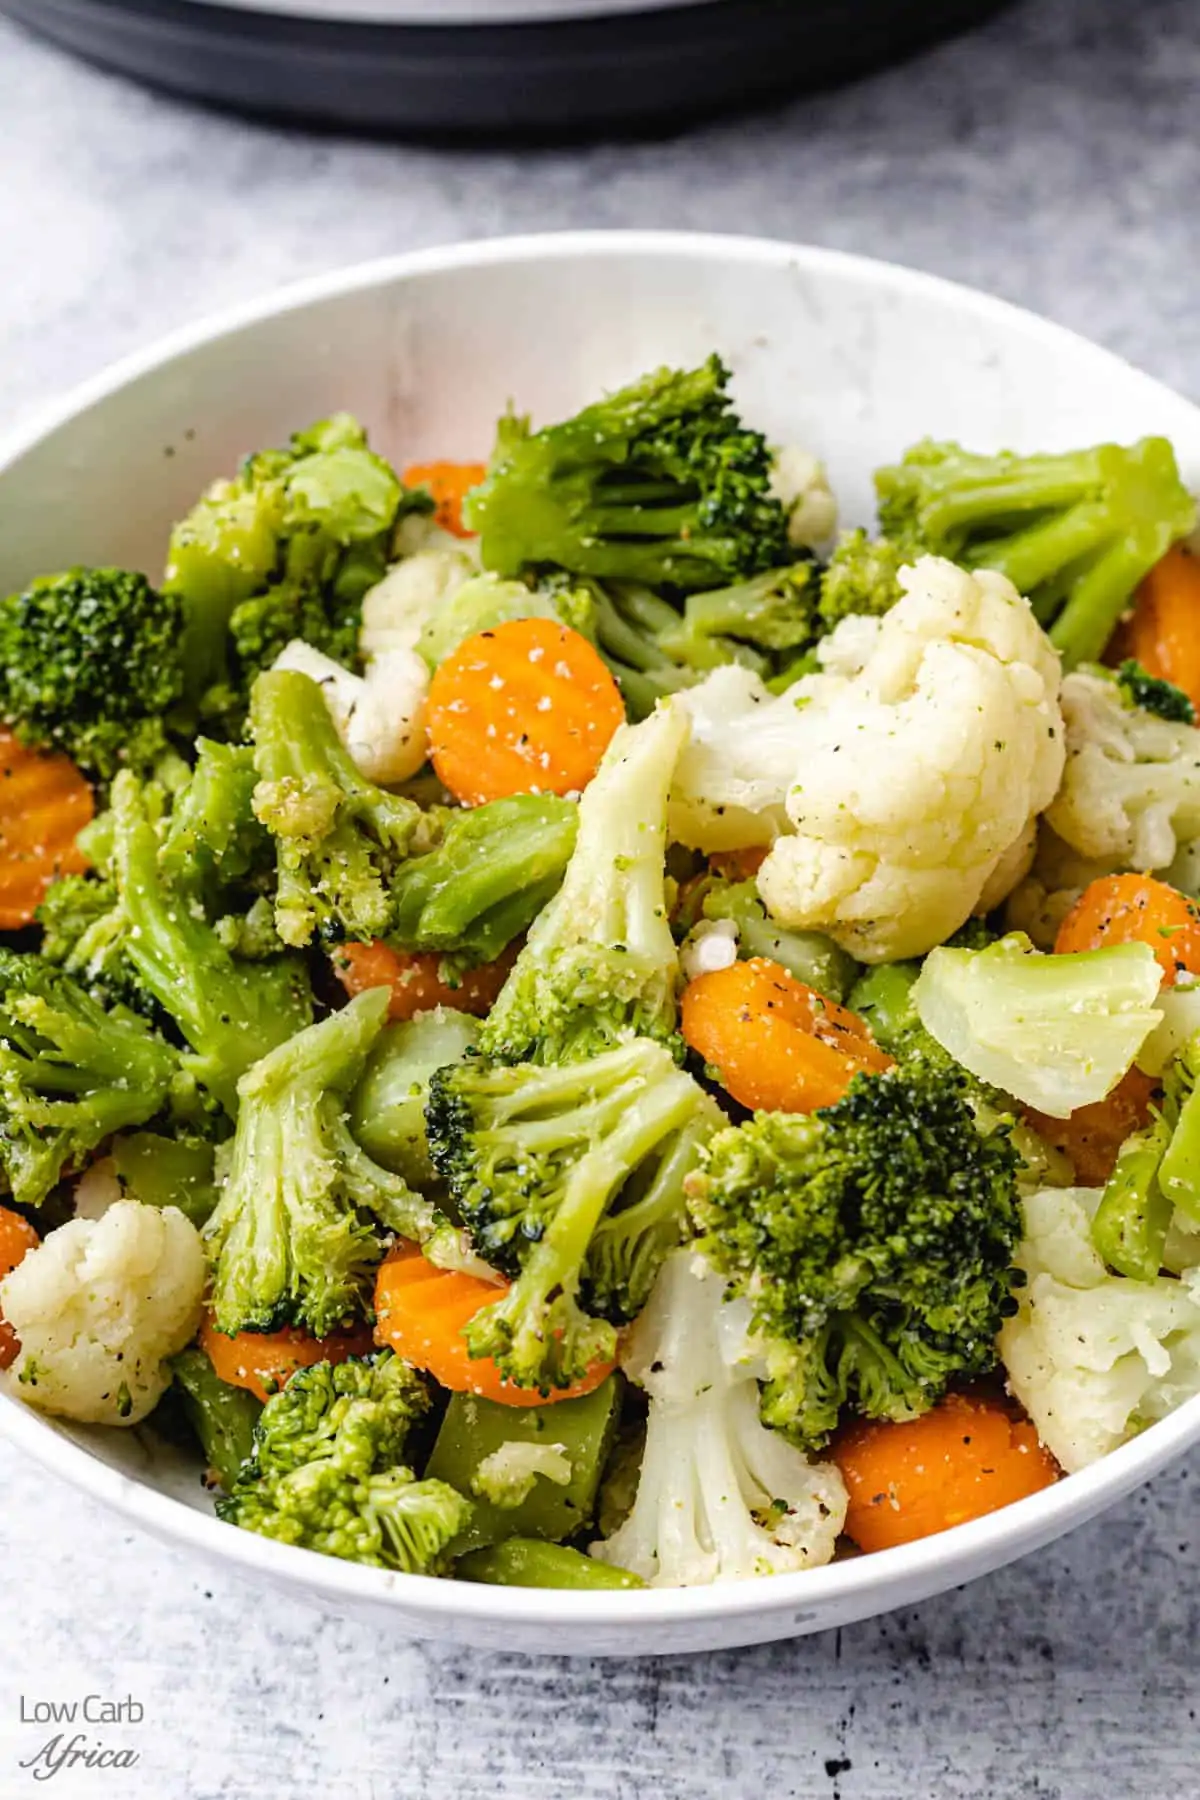 Steamed vegetables in a white plate